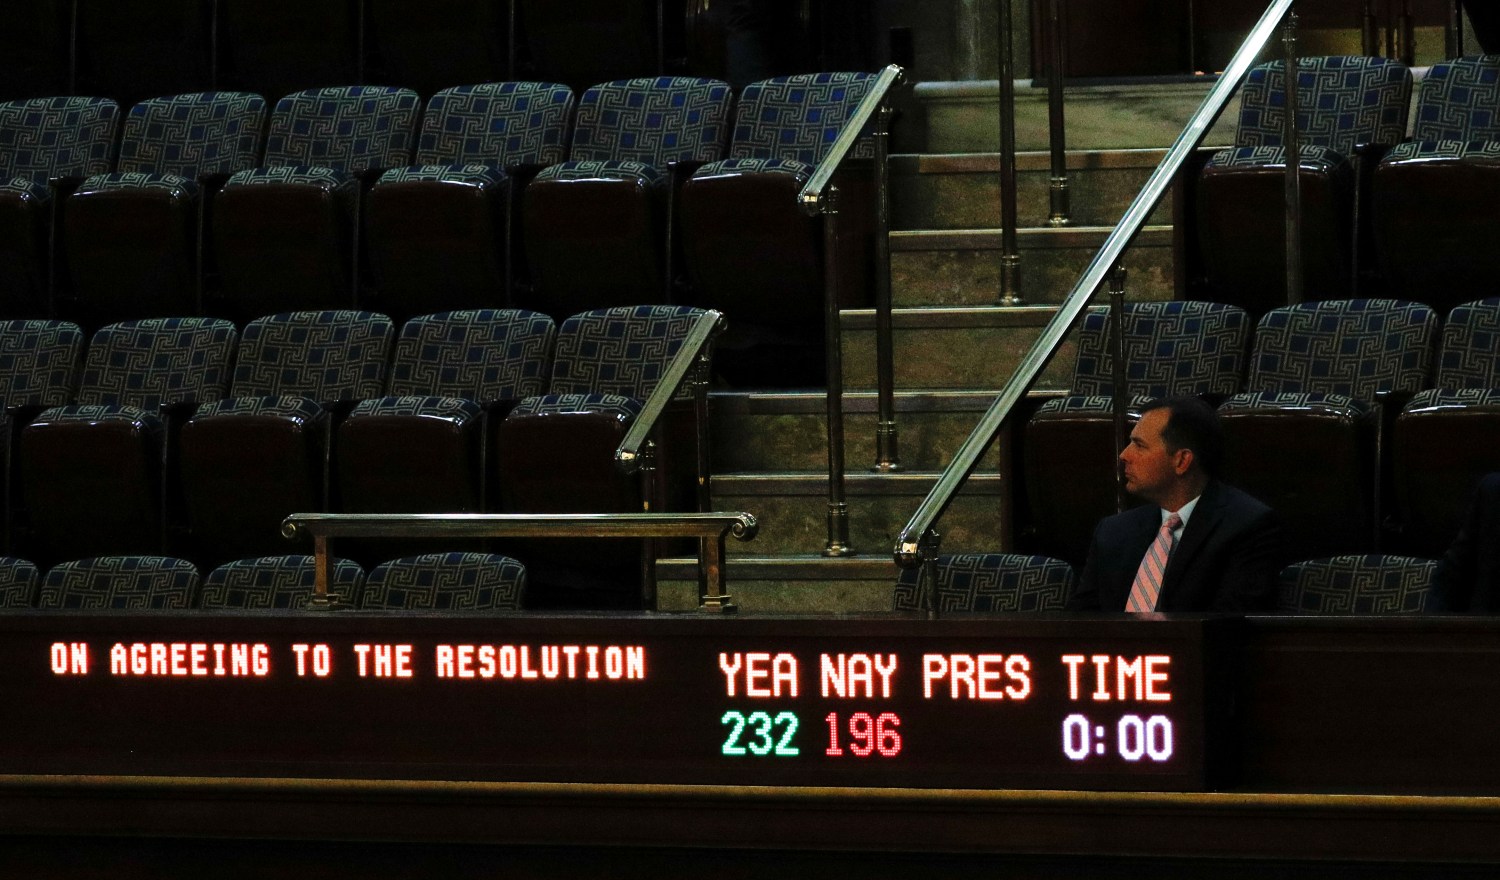 A man sits in the visitors gallery above the floor of the U.S. House of Representatives as a display board shows the final vote tallies of 232 Yea and 196 Nay on a resolution that outlines the next steps in the impeachment inquiry of U.S. President Donald Trump on Capitol Hill in Washington, U.S., October 31, 2019. REUTERS/Tom Brenner - RC1125BB6970